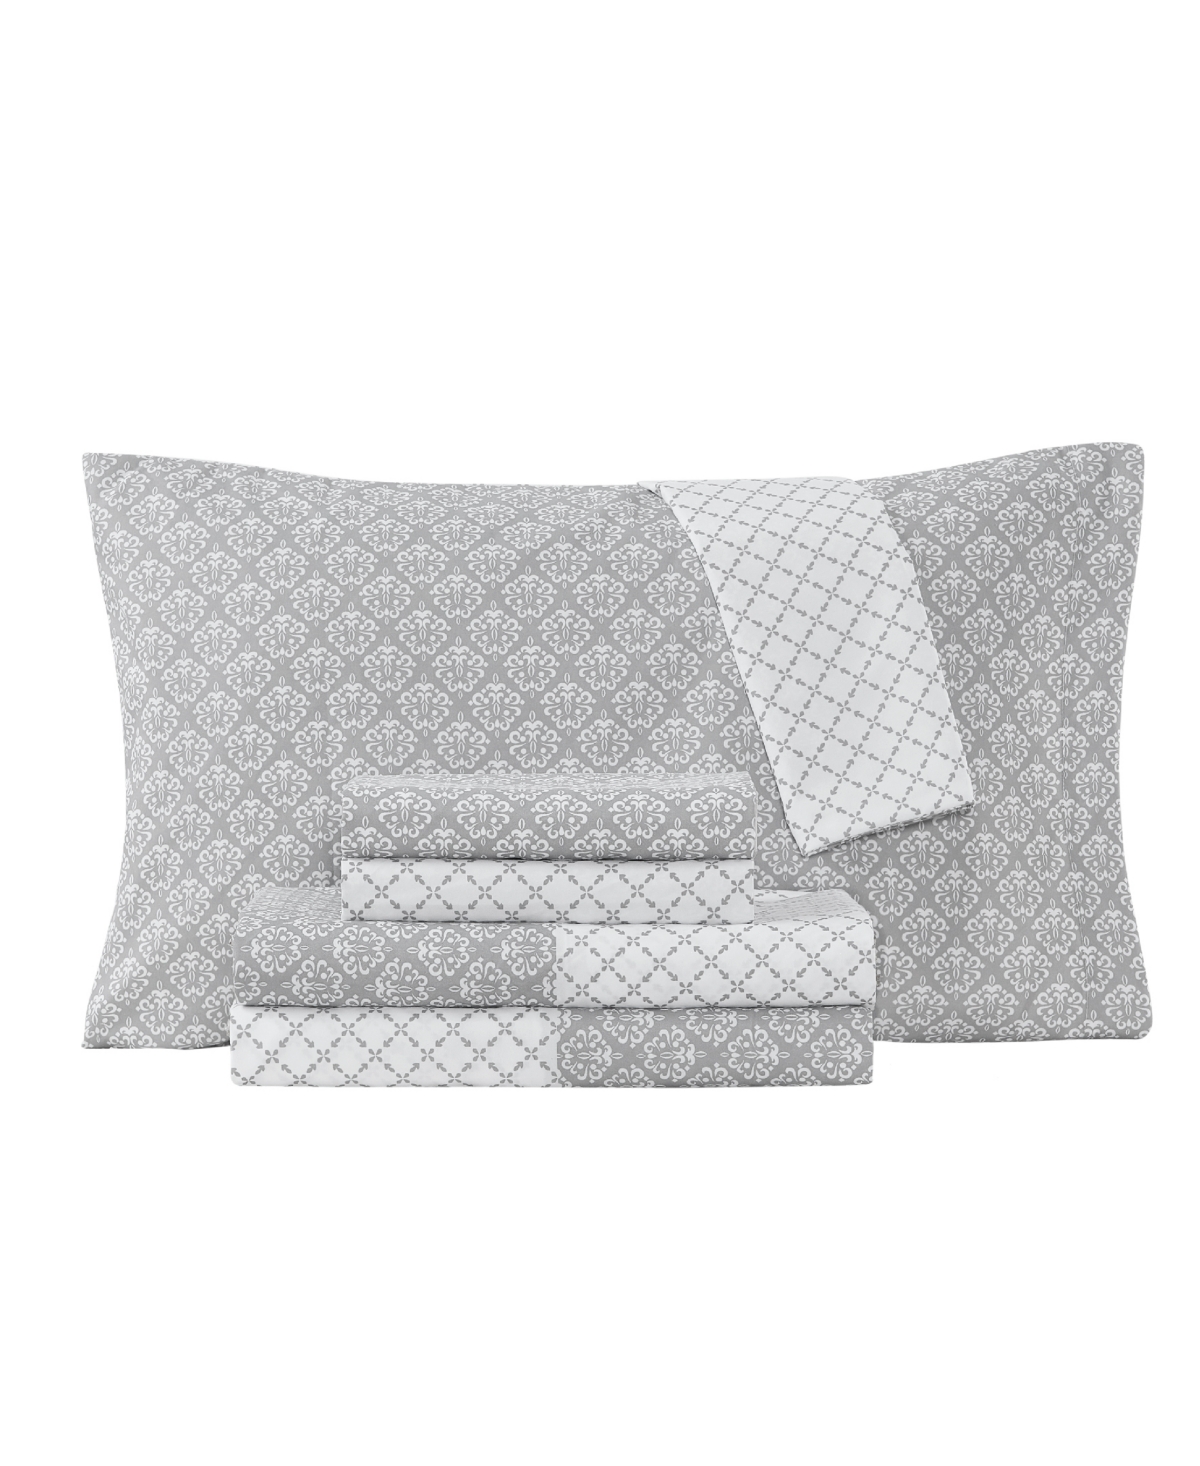 Jessica Sanders Emma Turnstyle Reversible Printed Super Soft Deep Pocket Twin Extra Long Sheet Set, 4 Pieces Bedding In Gray